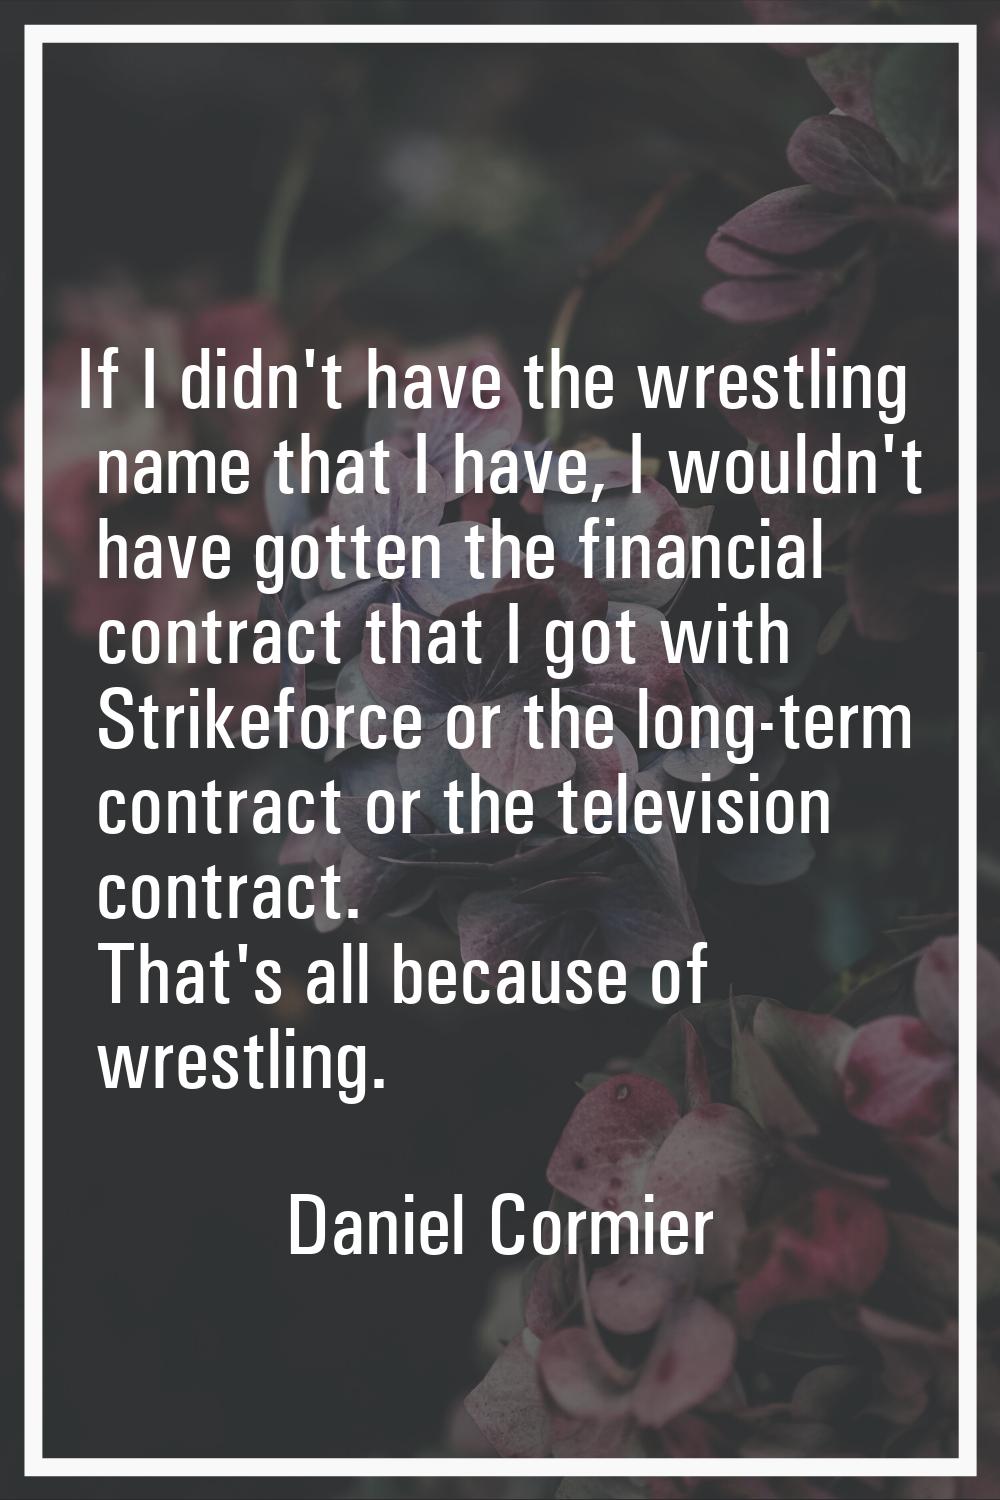 If I didn't have the wrestling name that I have, I wouldn't have gotten the financial contract that